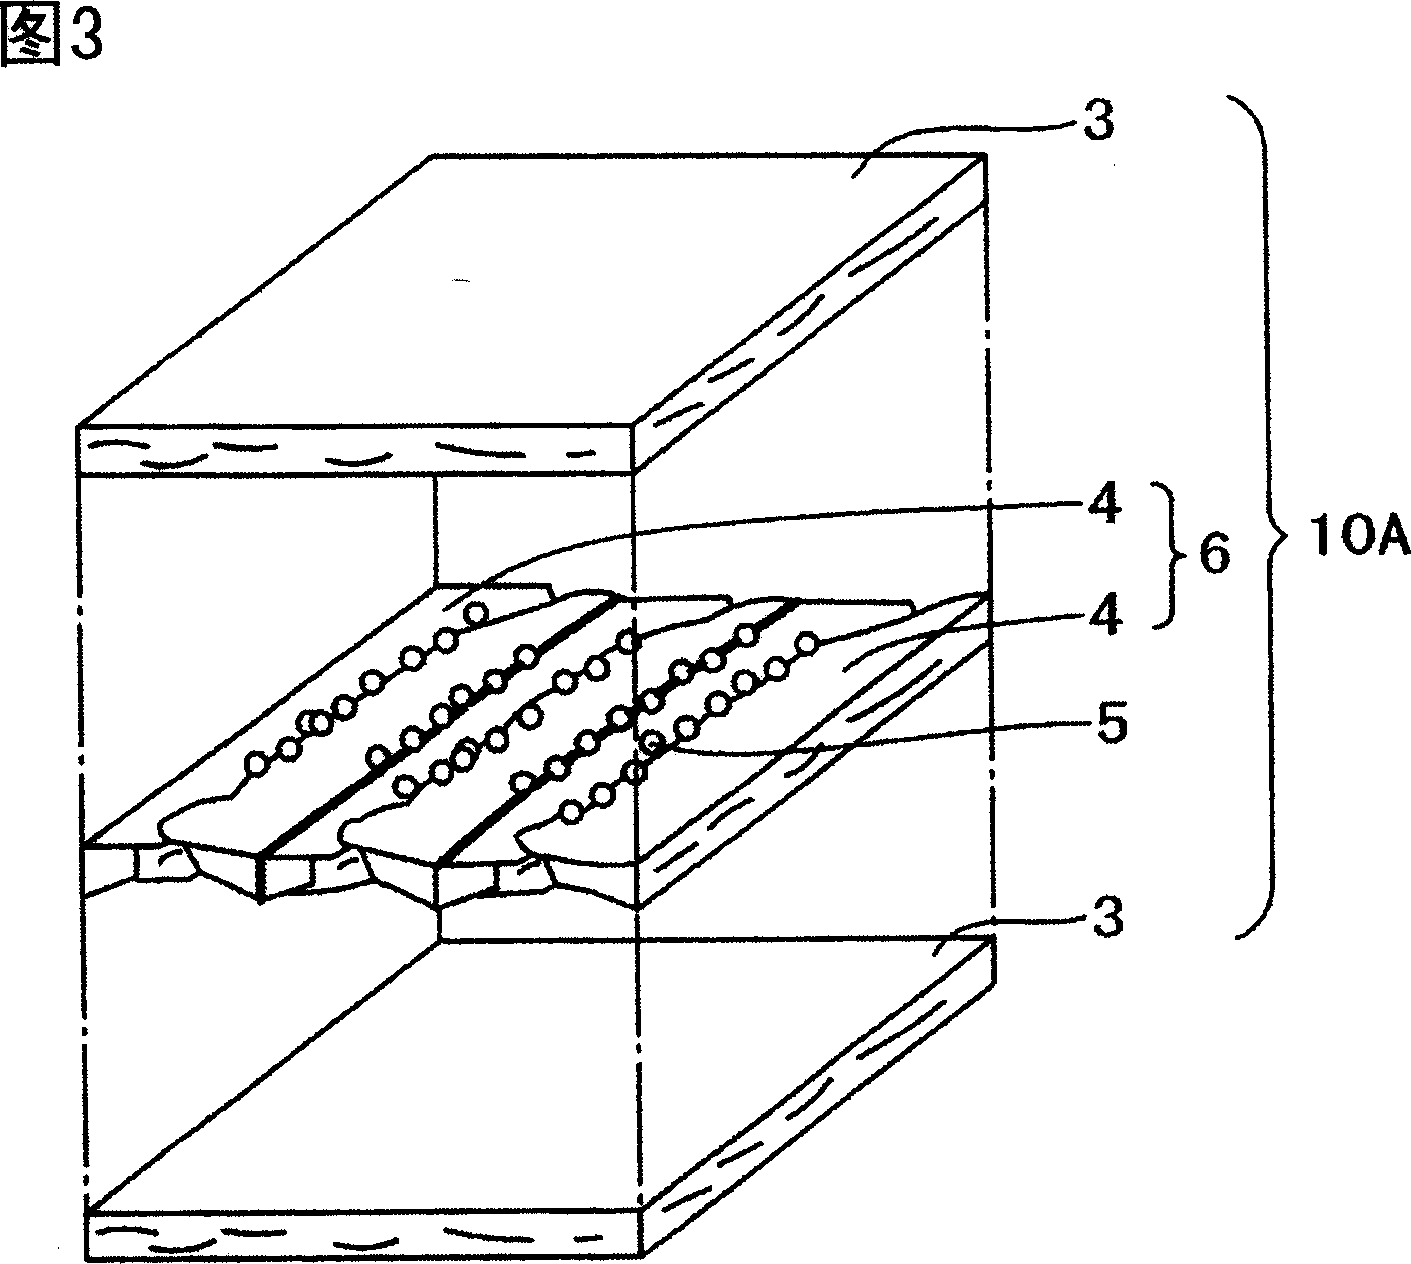 Vacuum heat-insulating material and method for making same